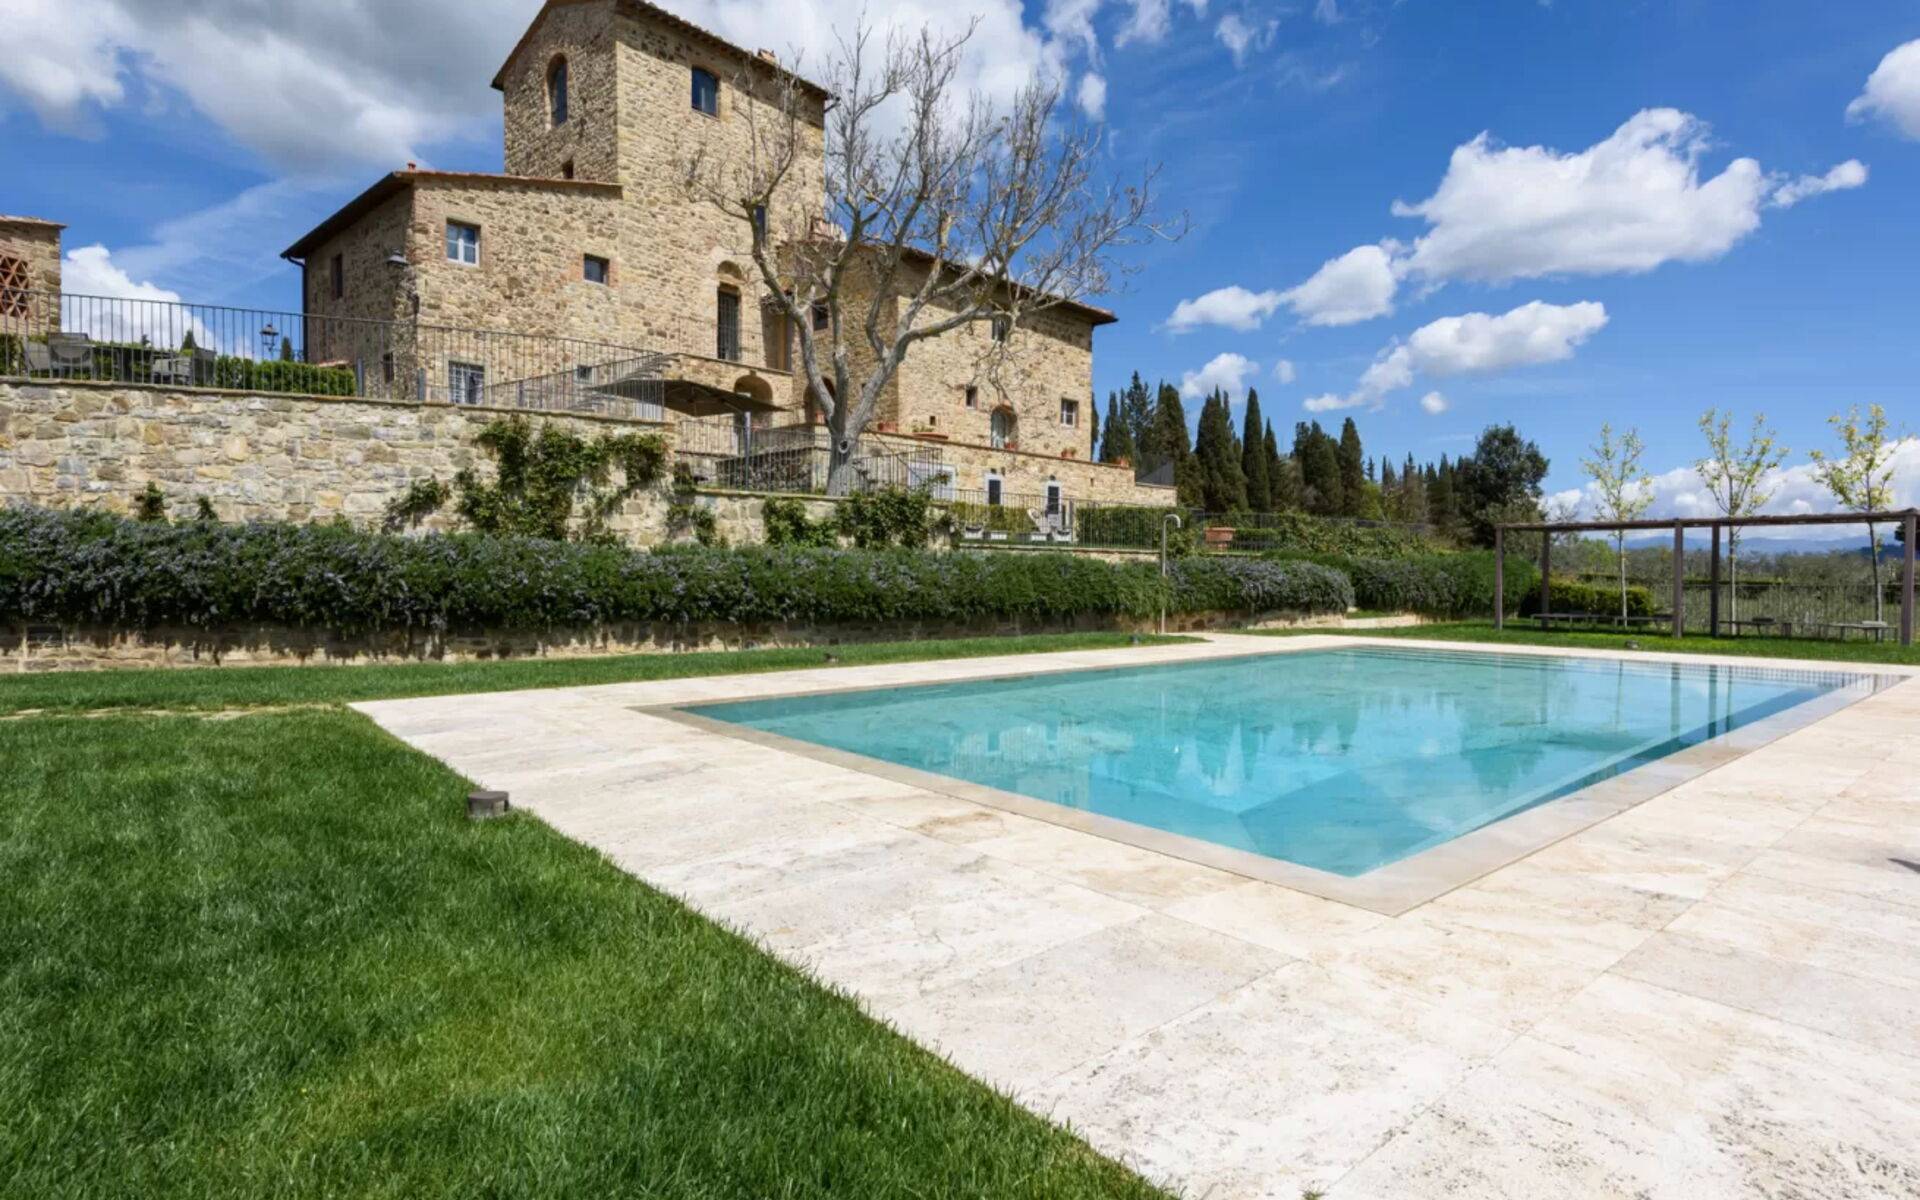 Fully equipped villa surrounded by Tuscan beauty